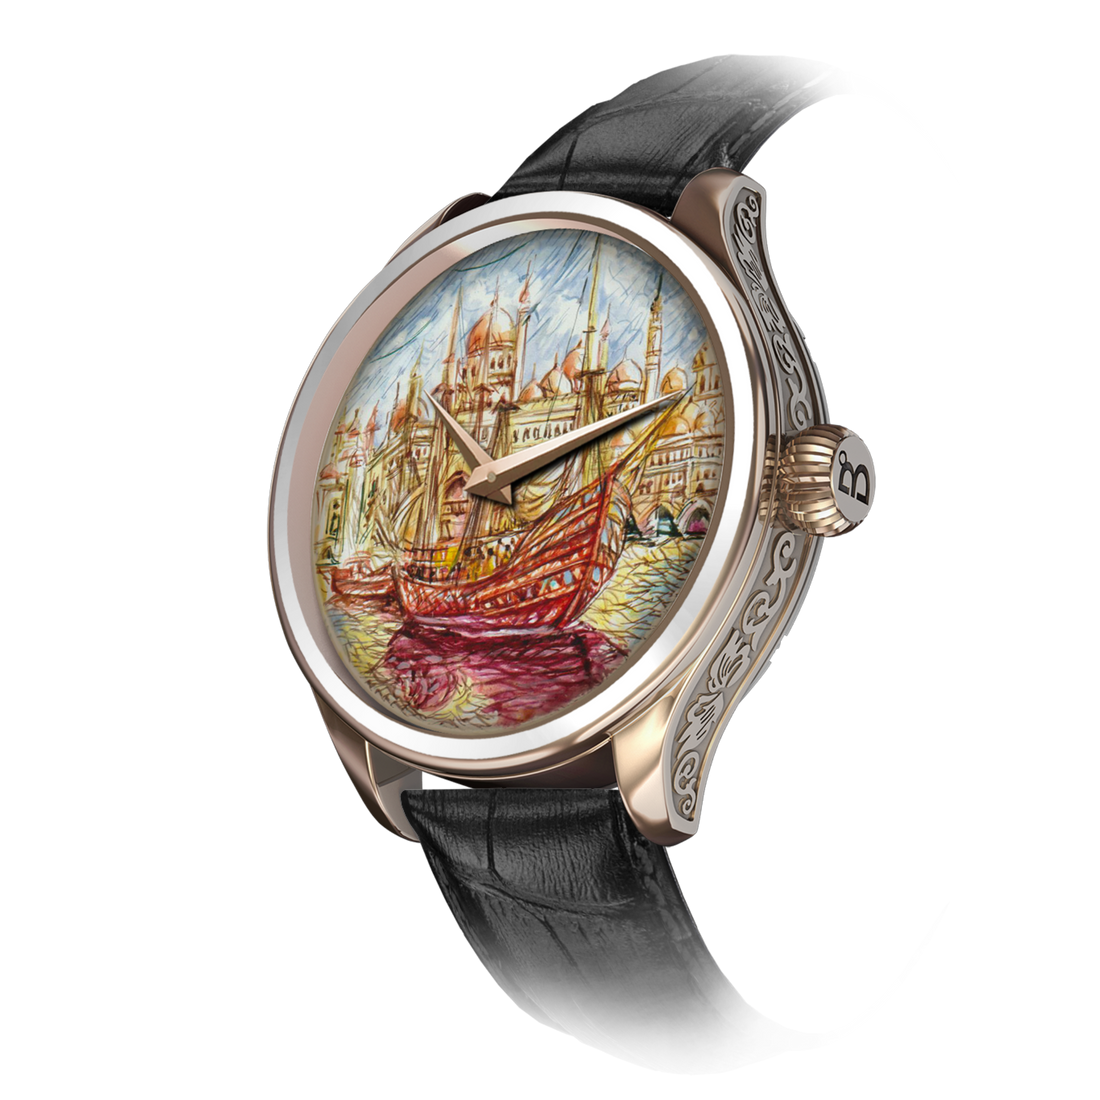 An exquisite artistic depiction of an Andalusian ship from a bygone era, showcasing elegance and beauty. B360 masterpiece reflecting the prosperity and spirit of Andalusian civilization